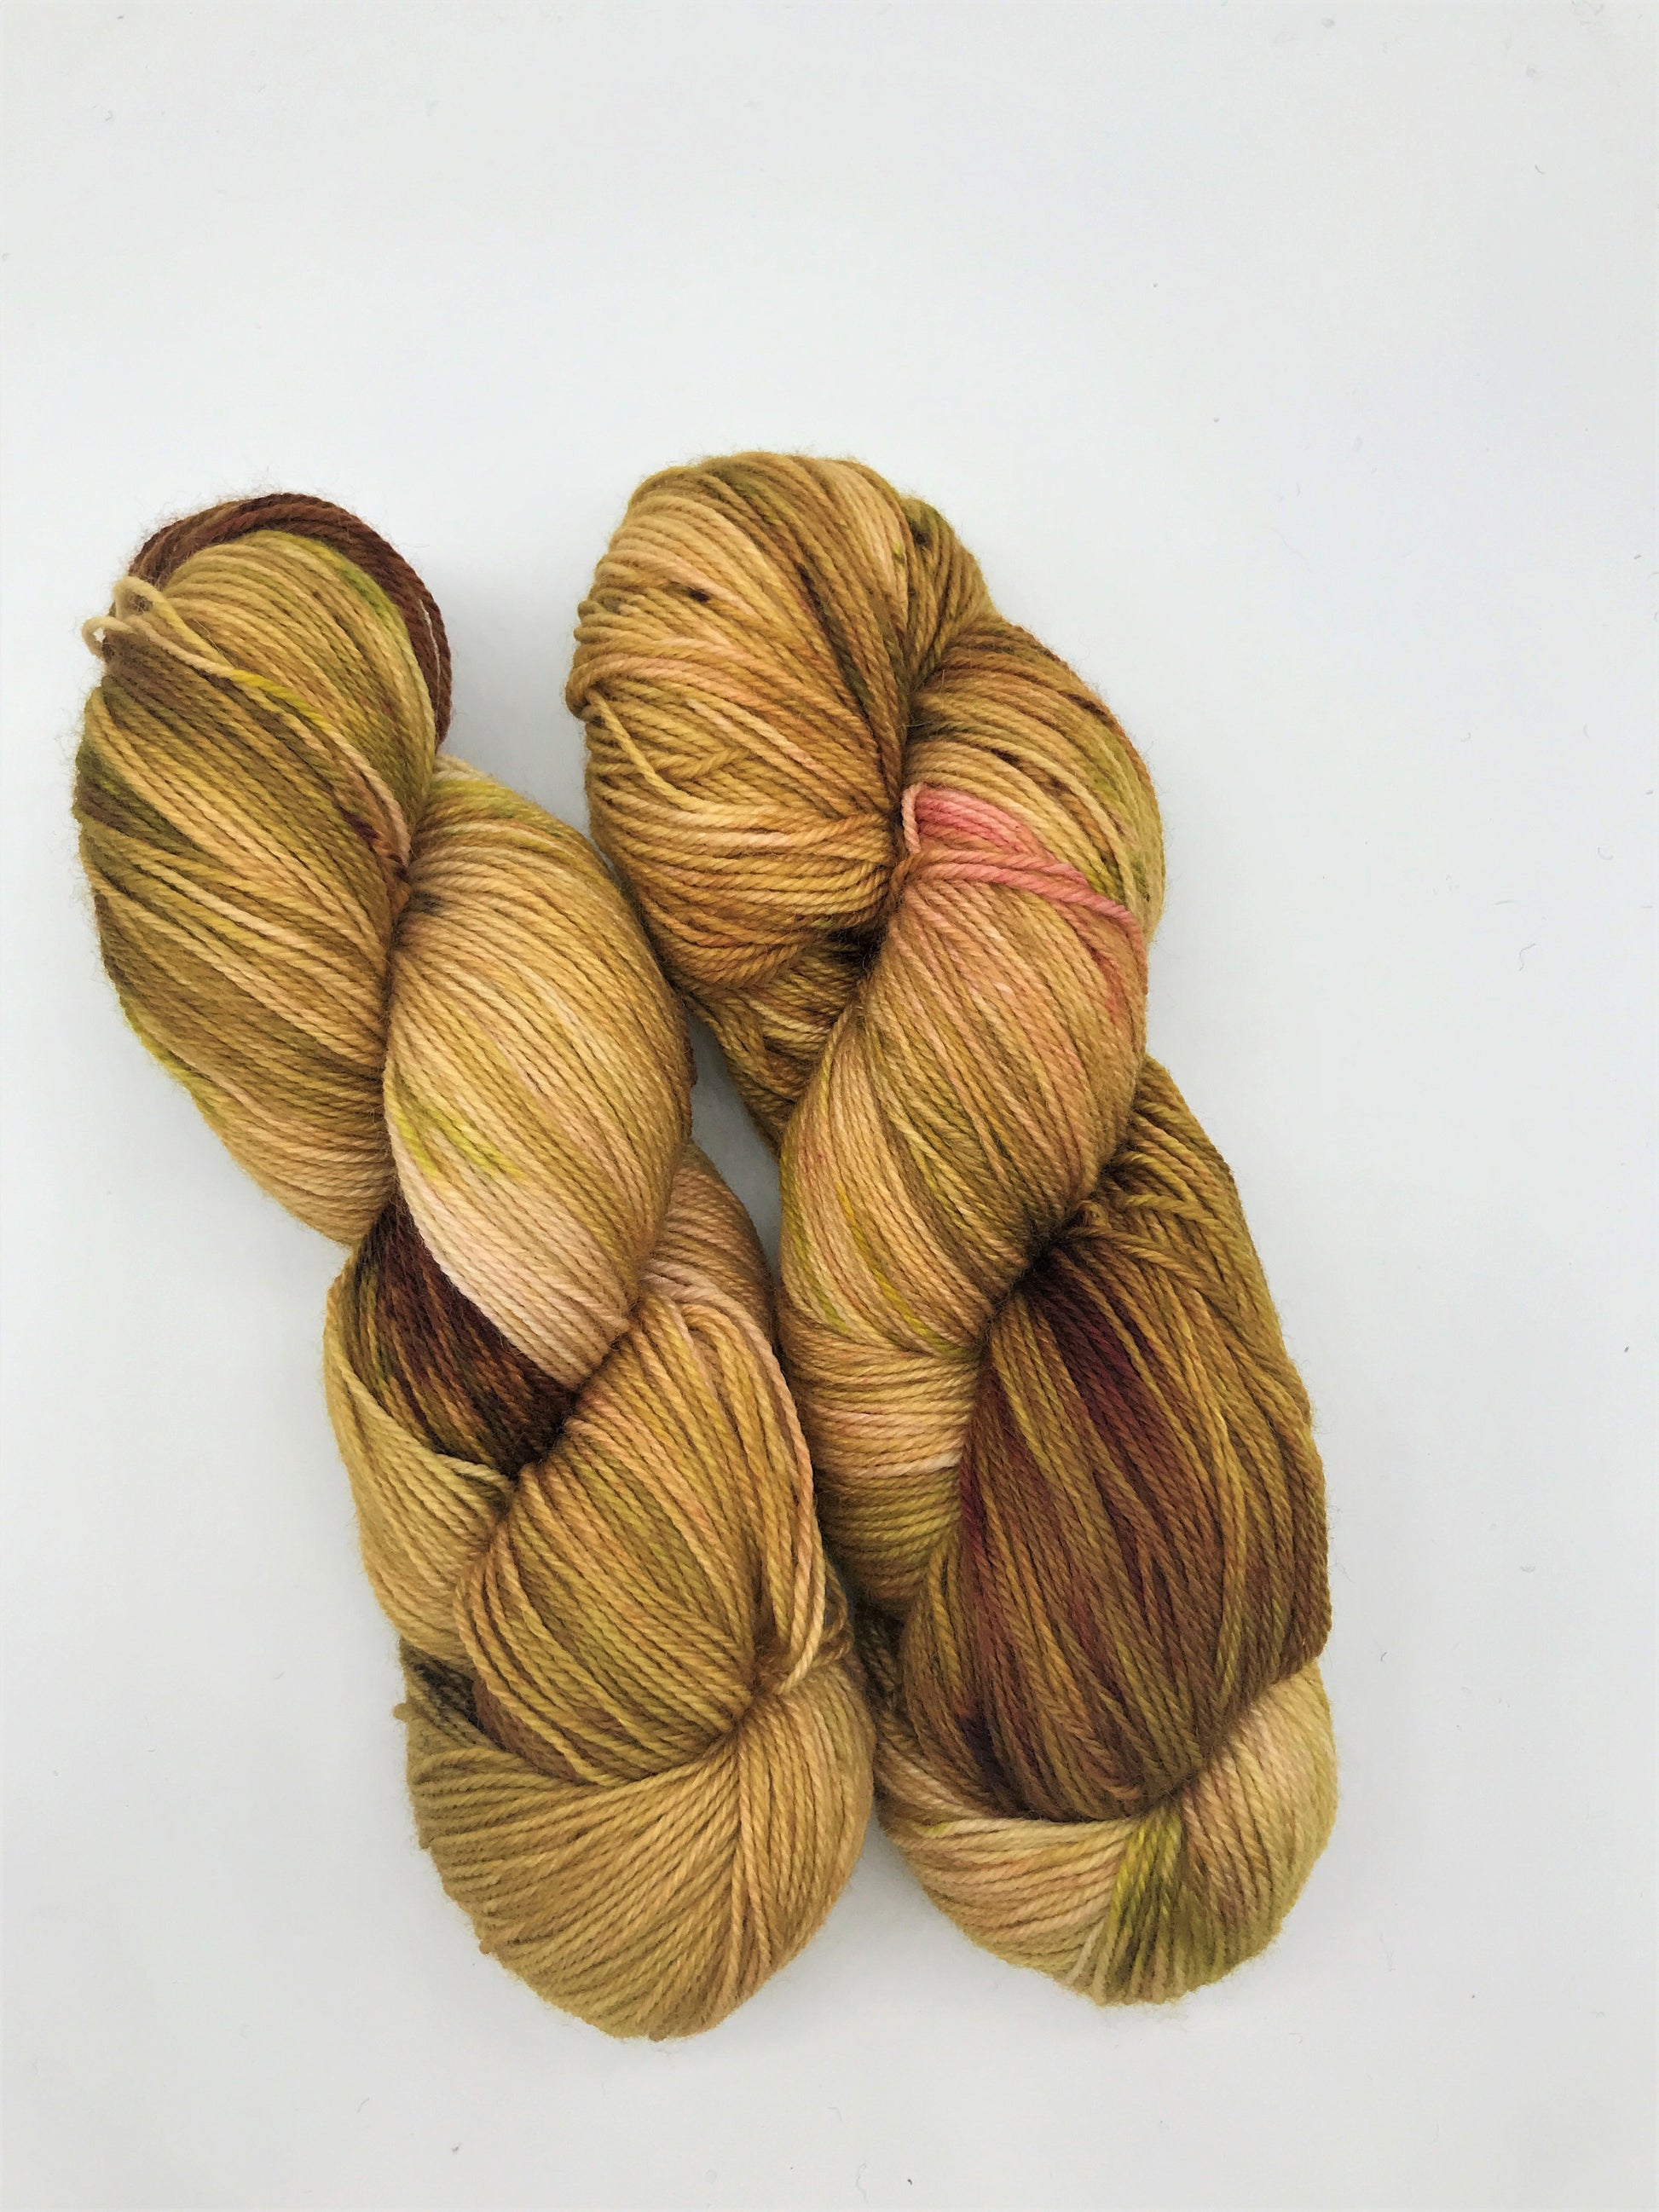 The End of Fall - Fingering 3 Ply - Okanagan Dye Works